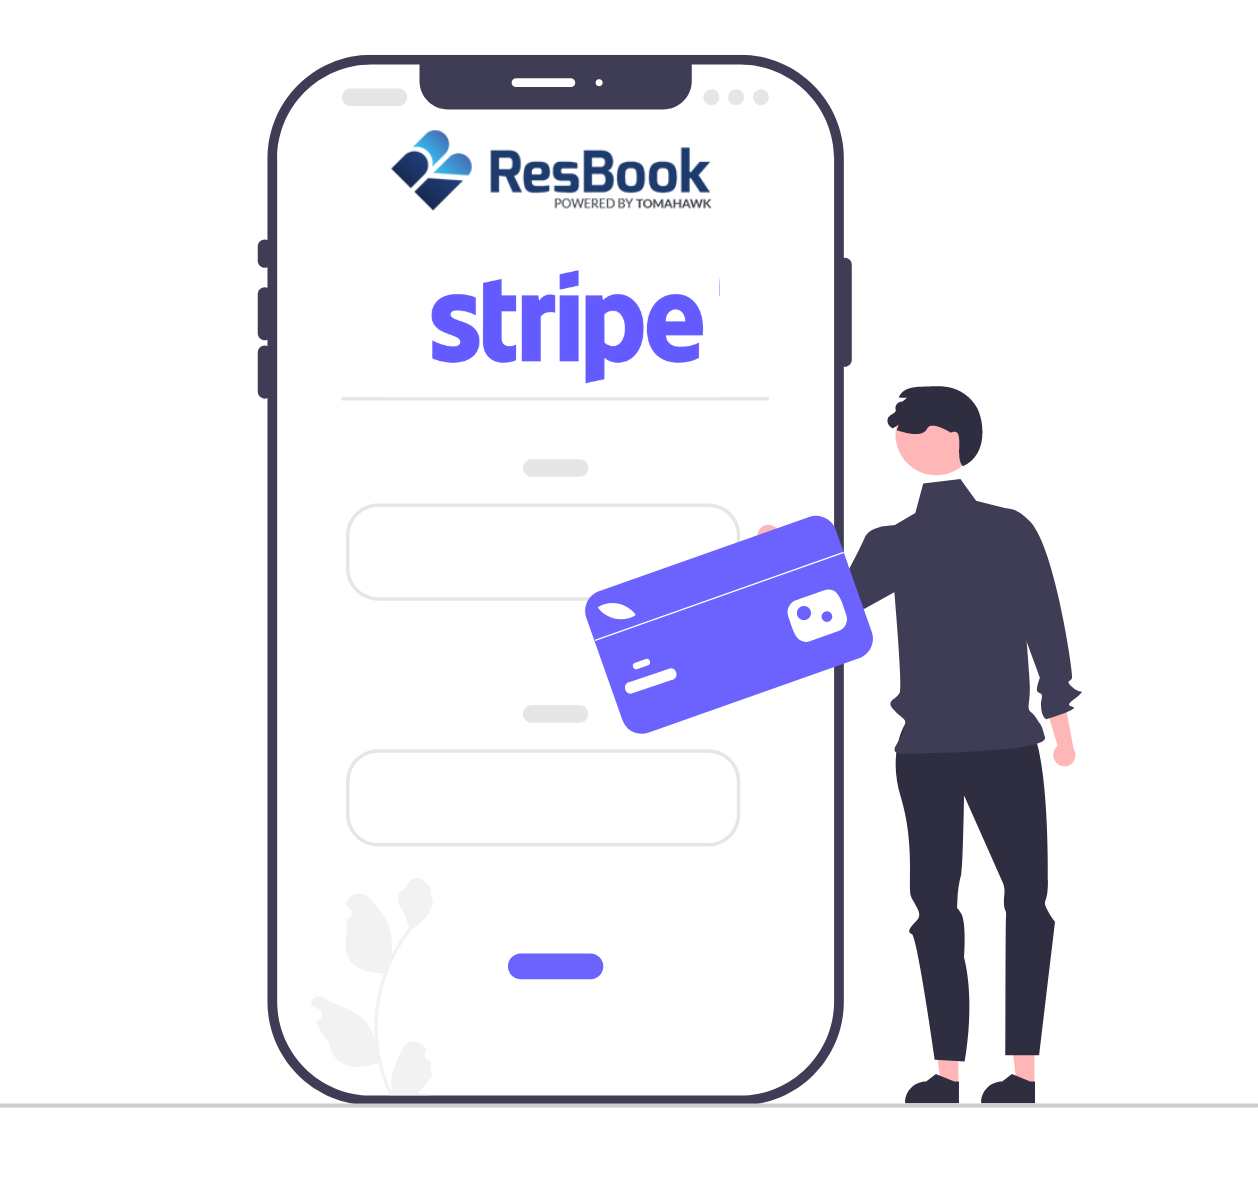 ResBook and Stripe image